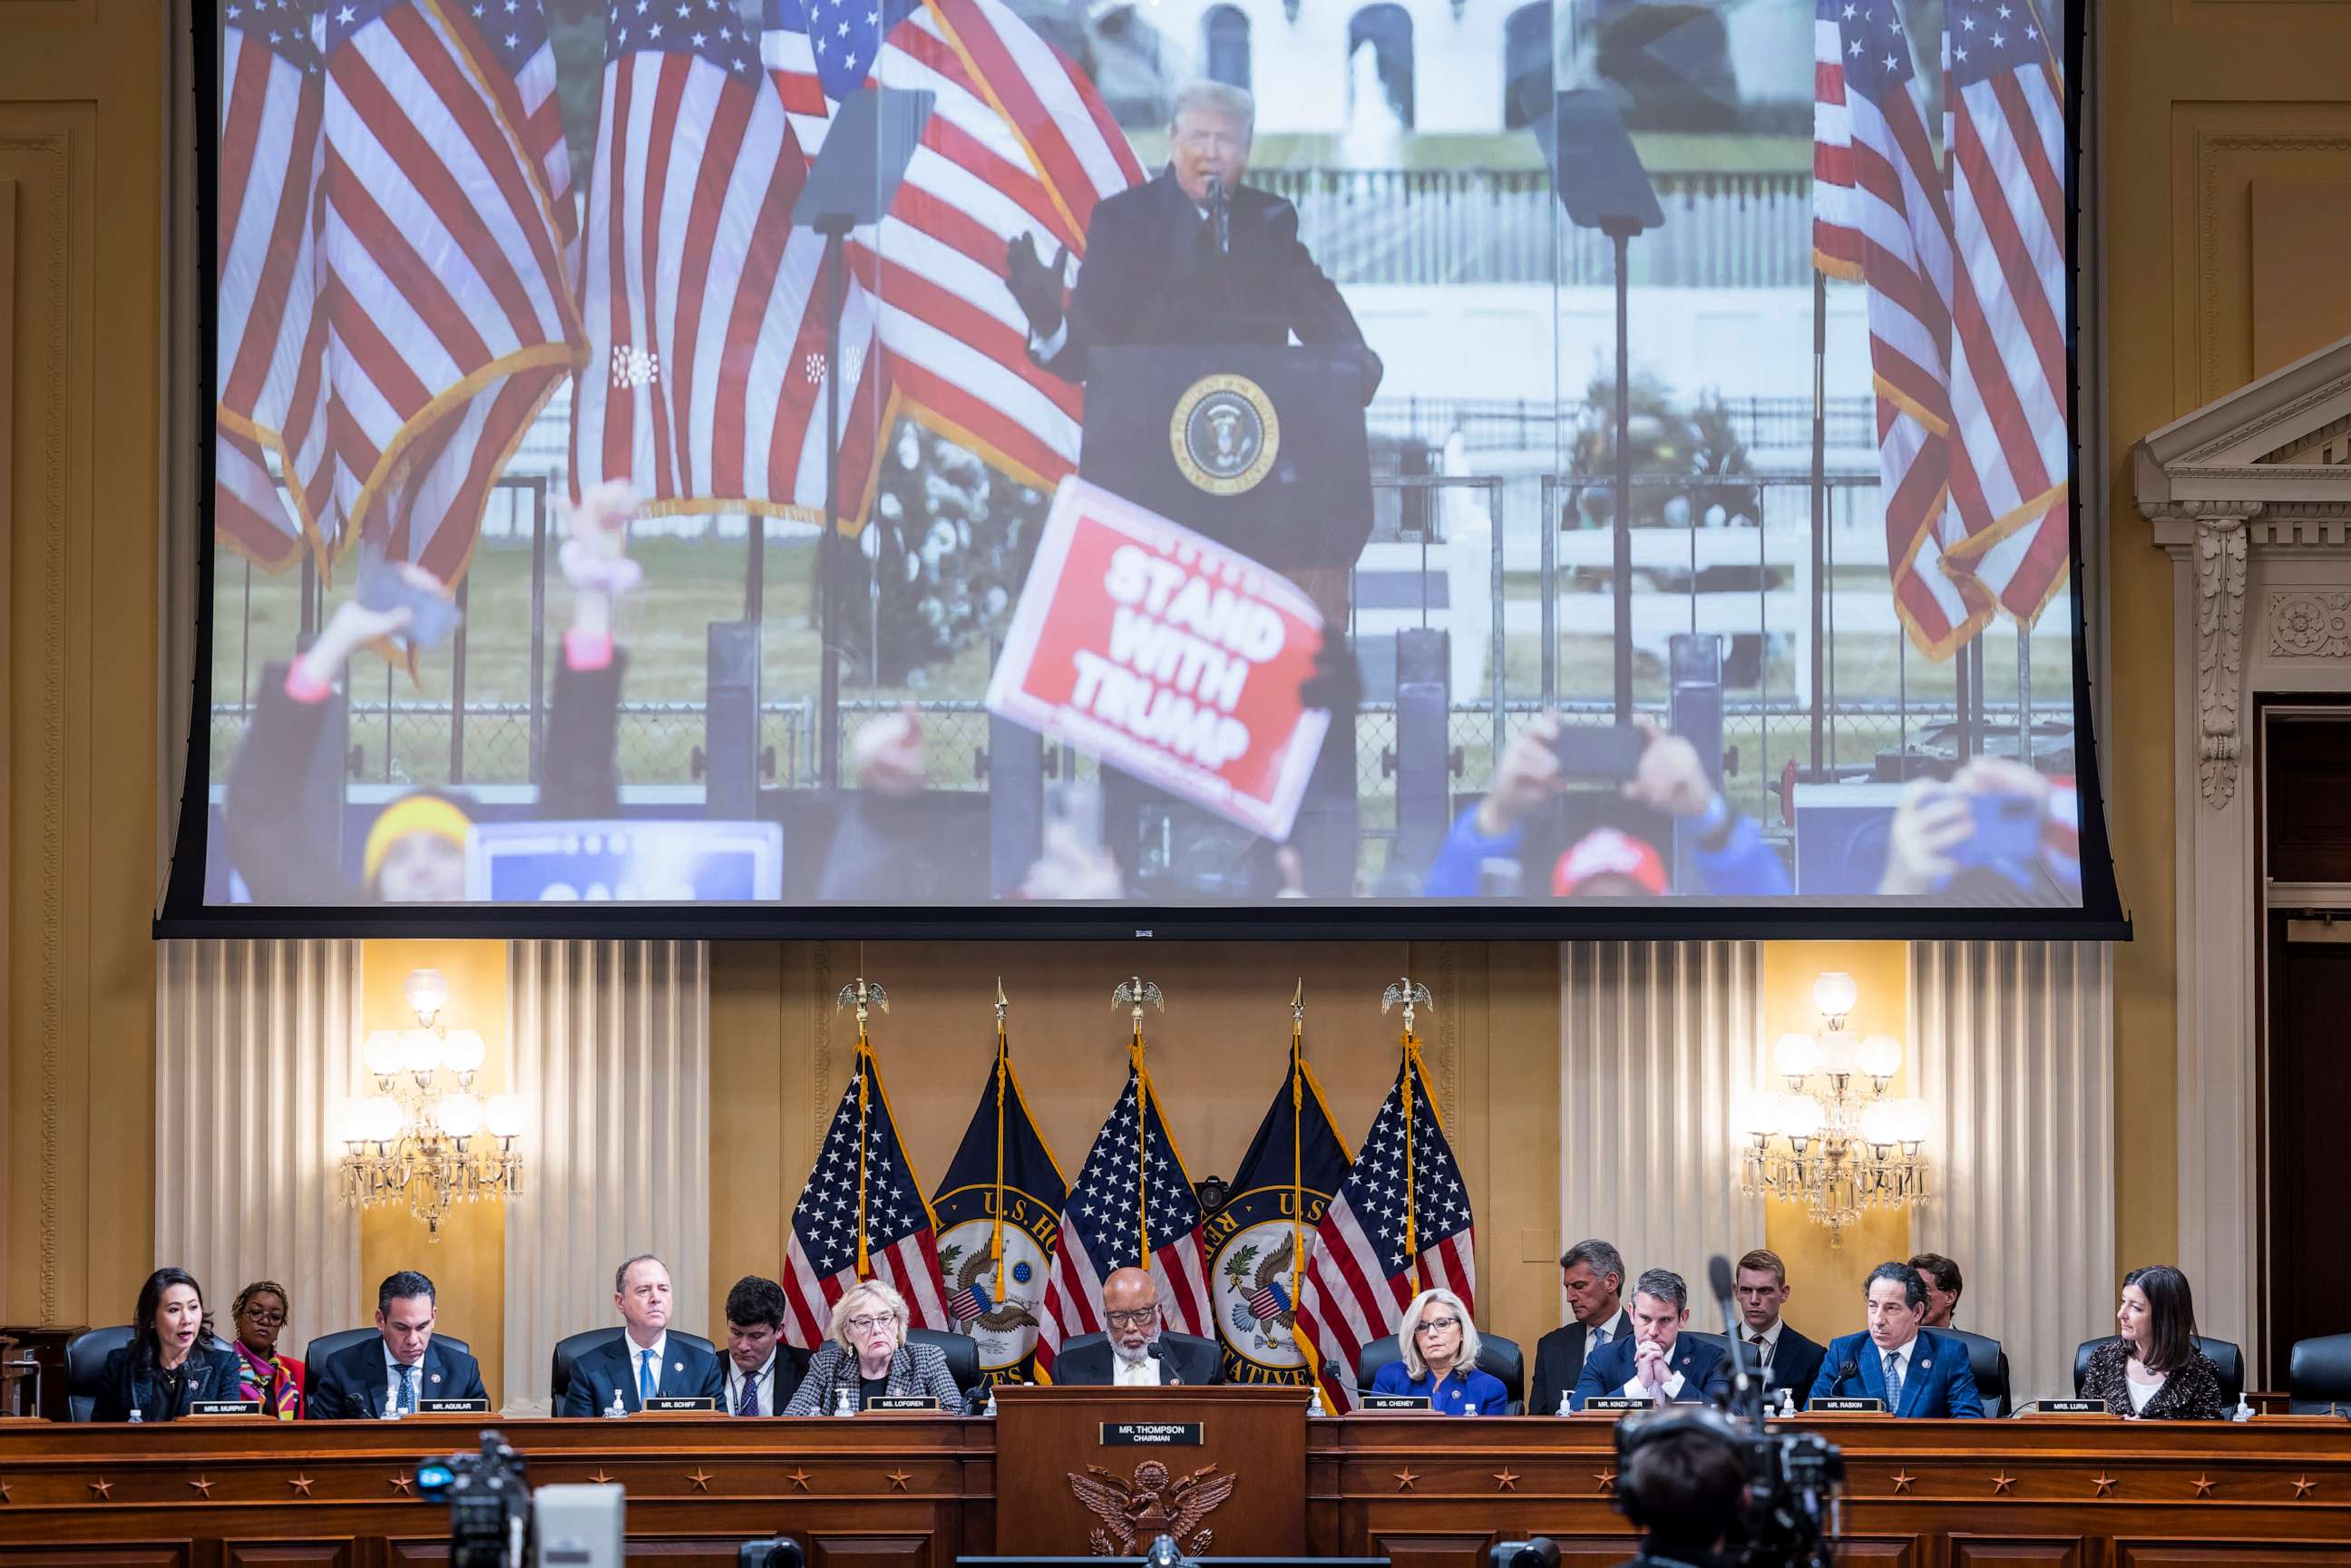 PHOTO: An image of former President Donald Trump is displayed as members of the House Select Committee to Investigate the January 6 Attack on the U.S. Capitol hold its last public hearing on Capitol Hill, Dec. 19, 2022 in Washington, DC.